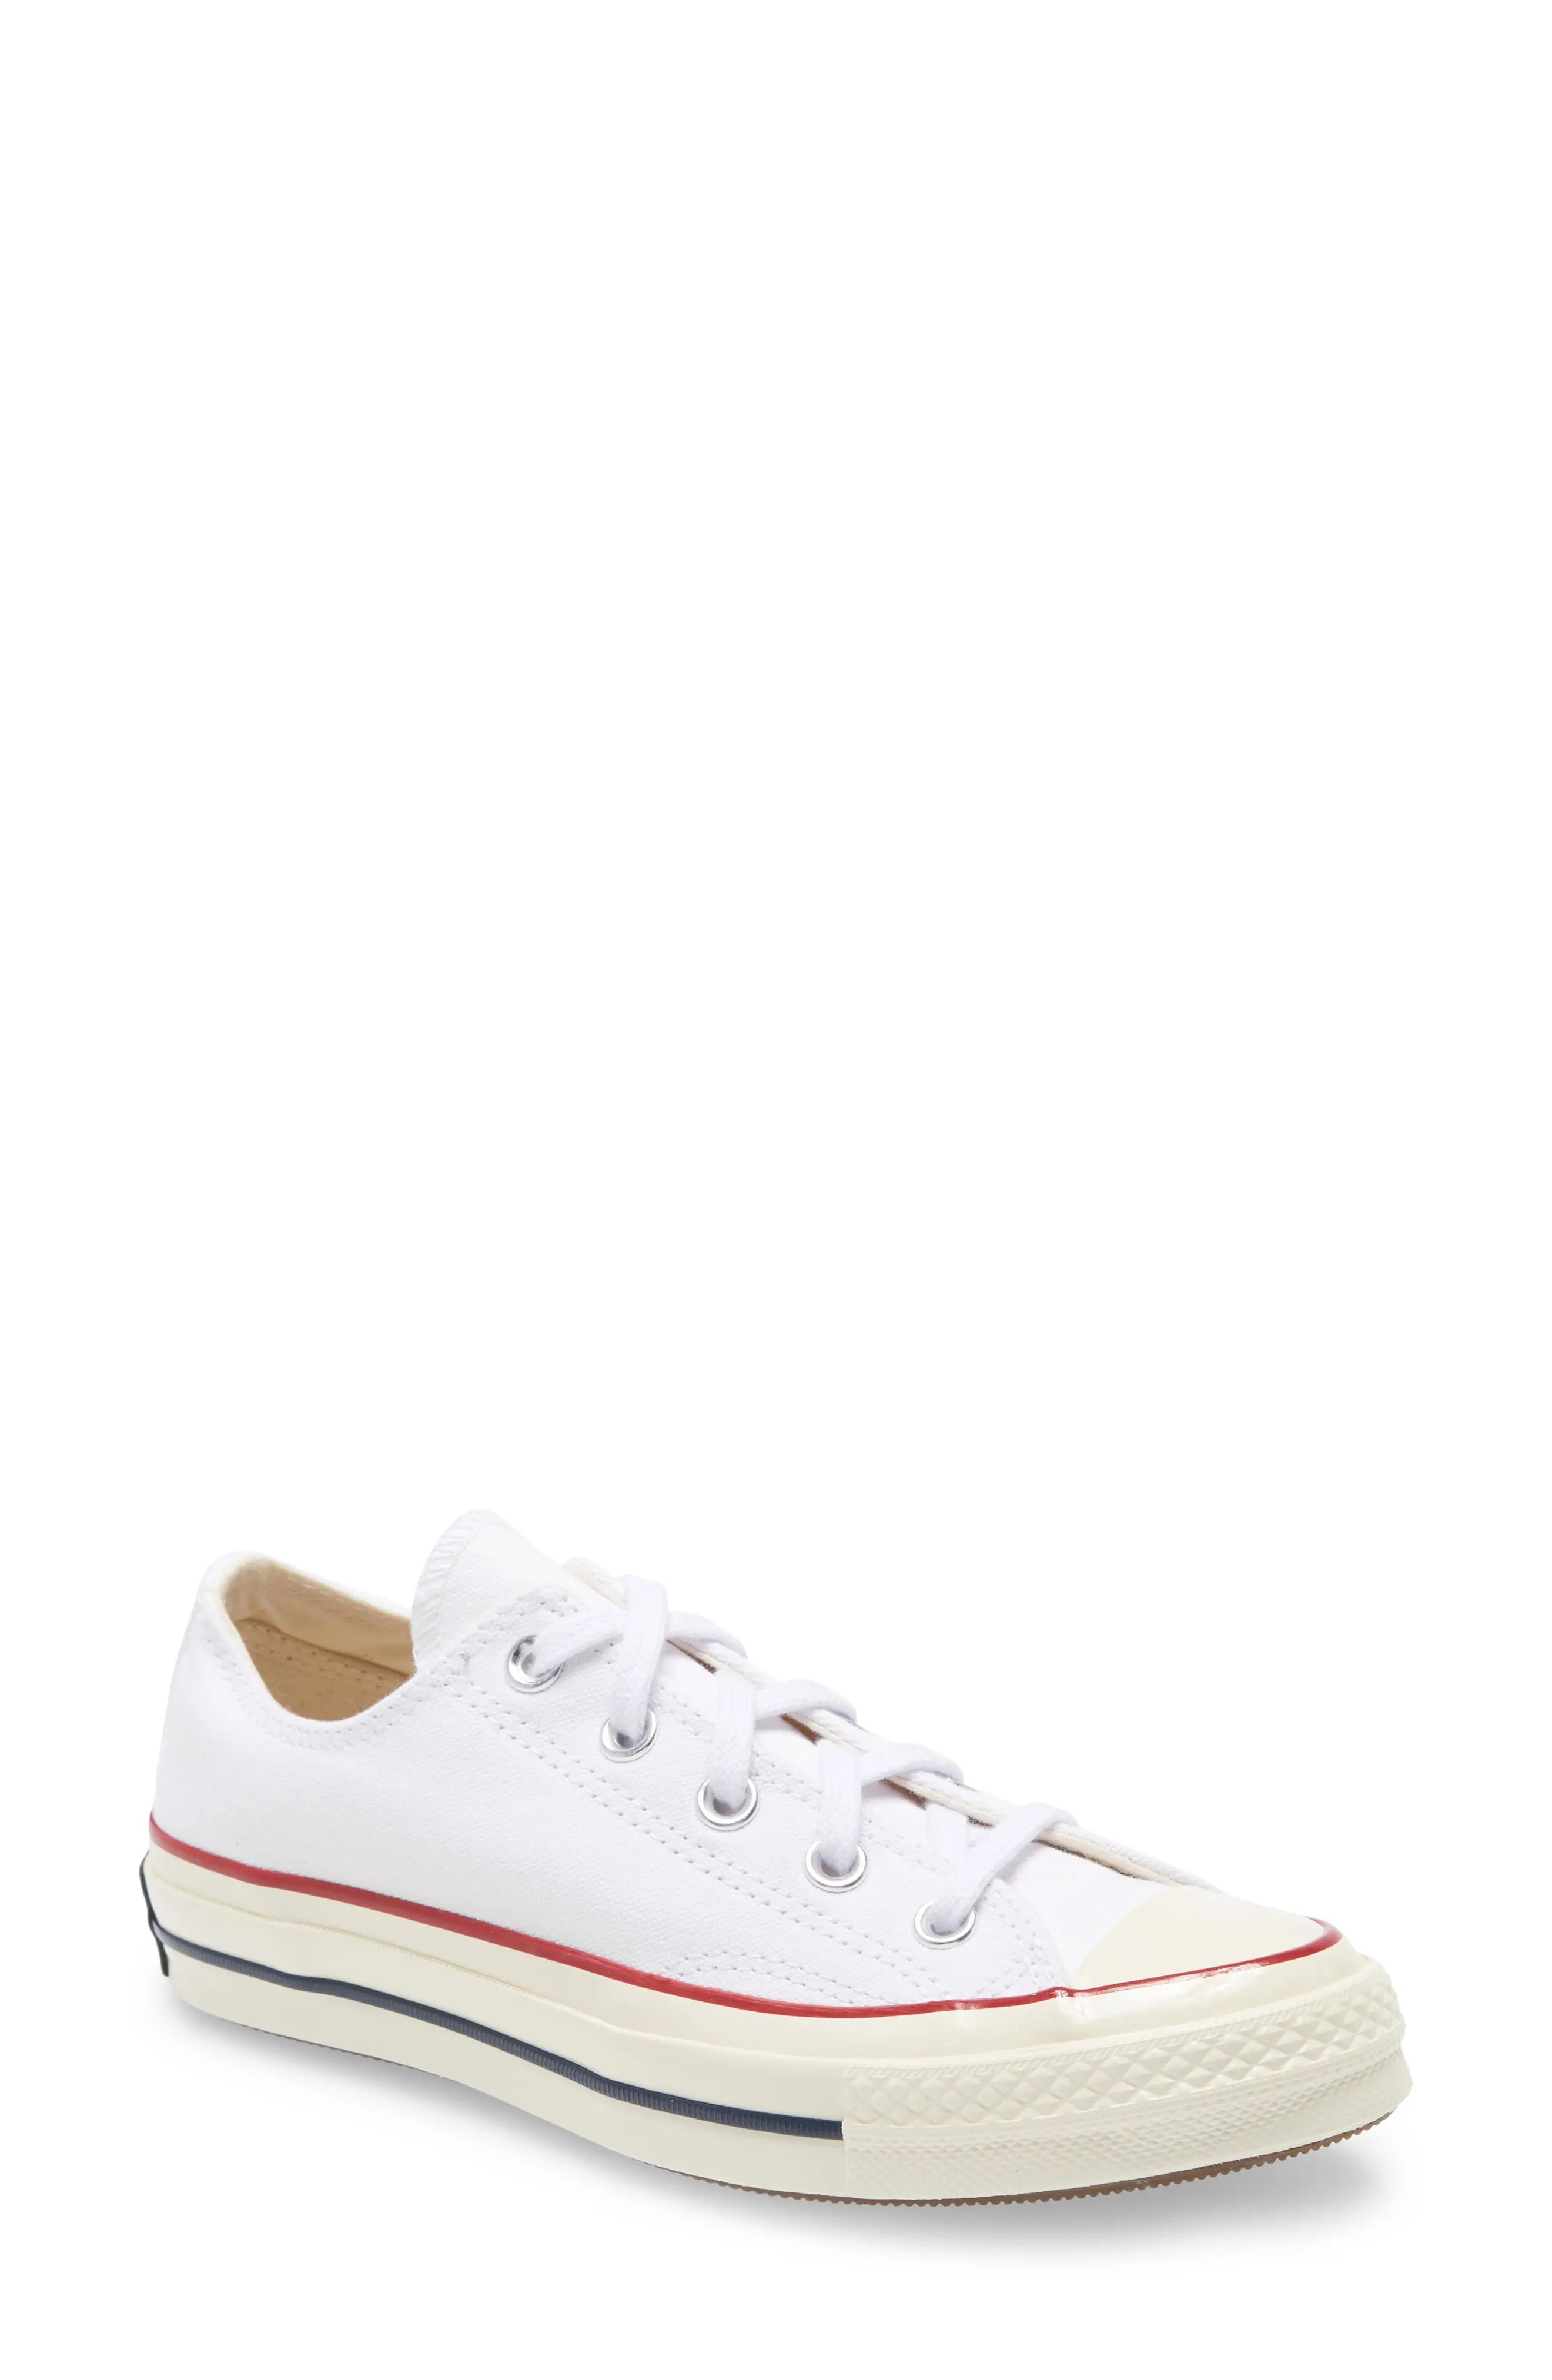 Women's Converse Chuck All Star 70 Low Top Sneaker, Size 9.5 M - White | Nordstrom